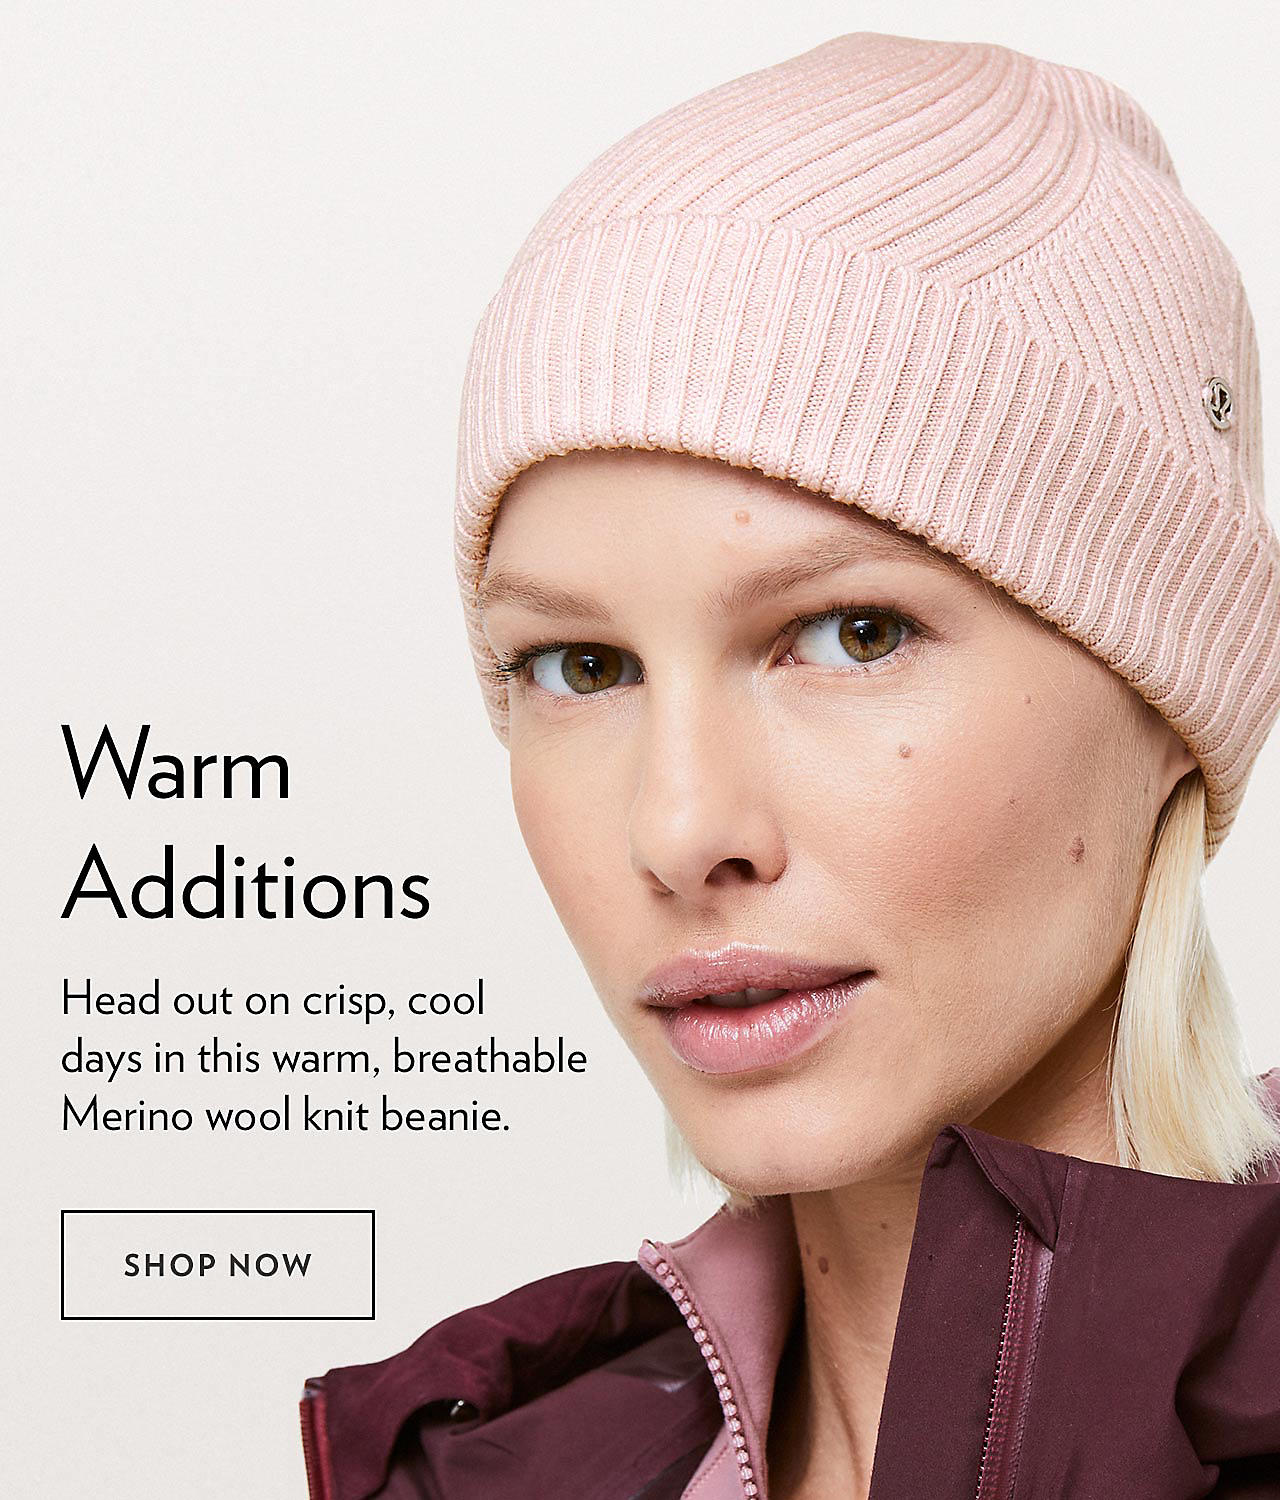 Warm Additions - SHOP NOW